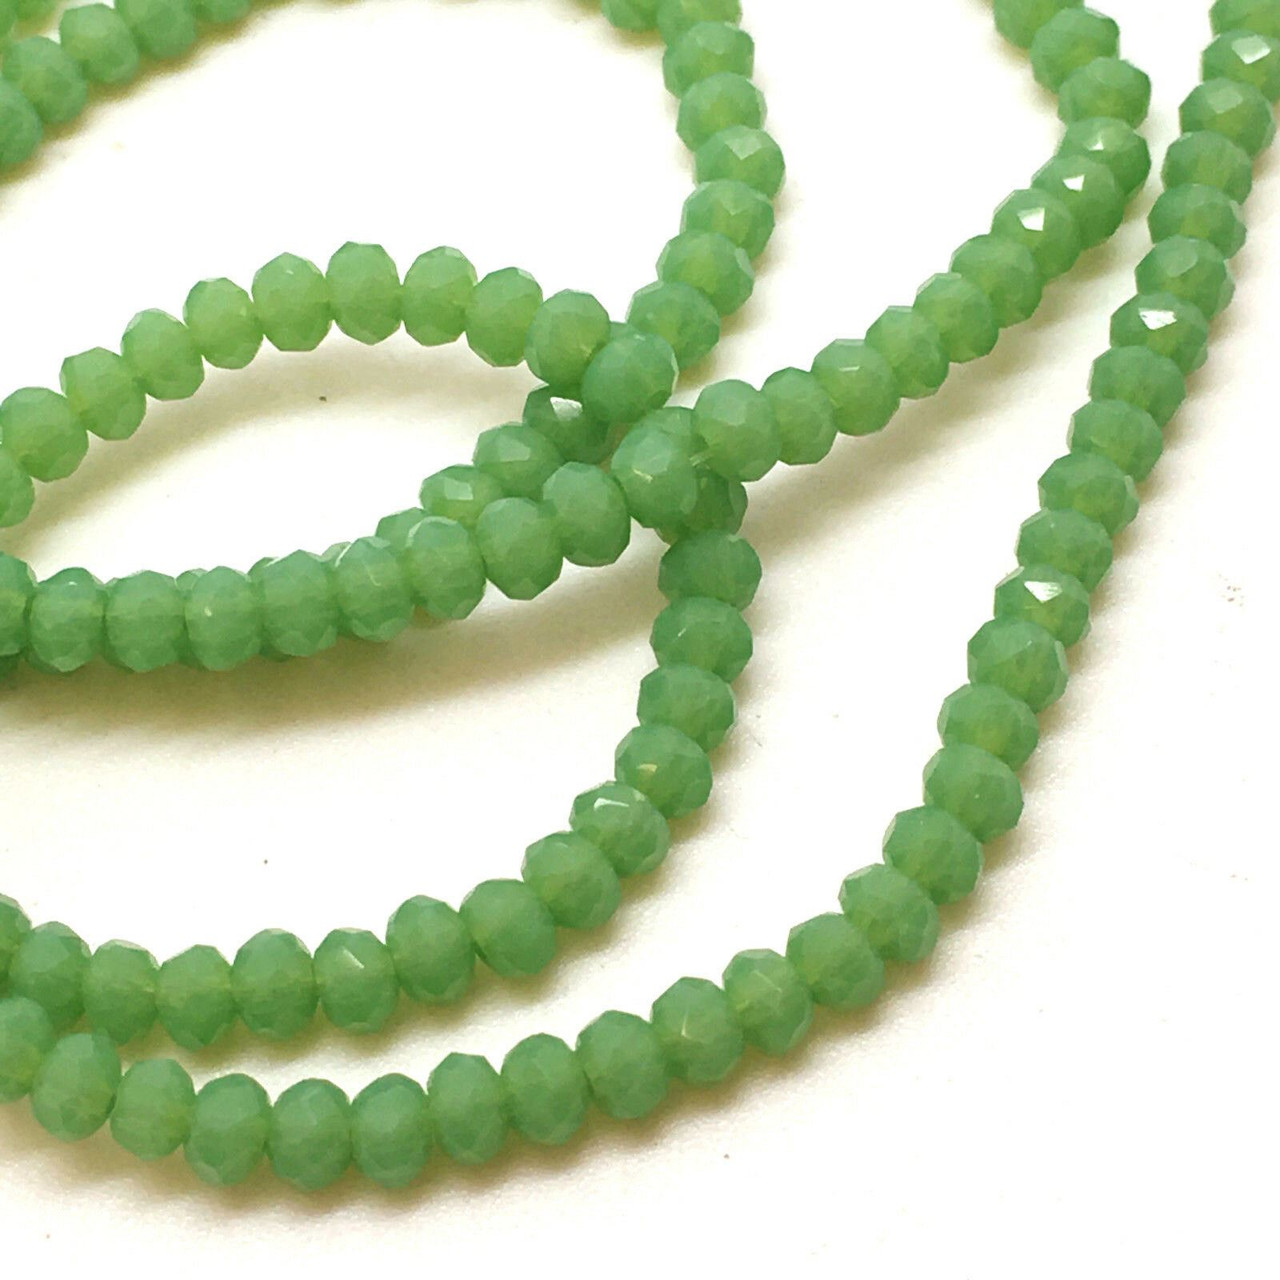 3x2mm Glass Rondelle beads - LIGHT GREEN OPAQUE - approx 15" strand (approx 200 beads)